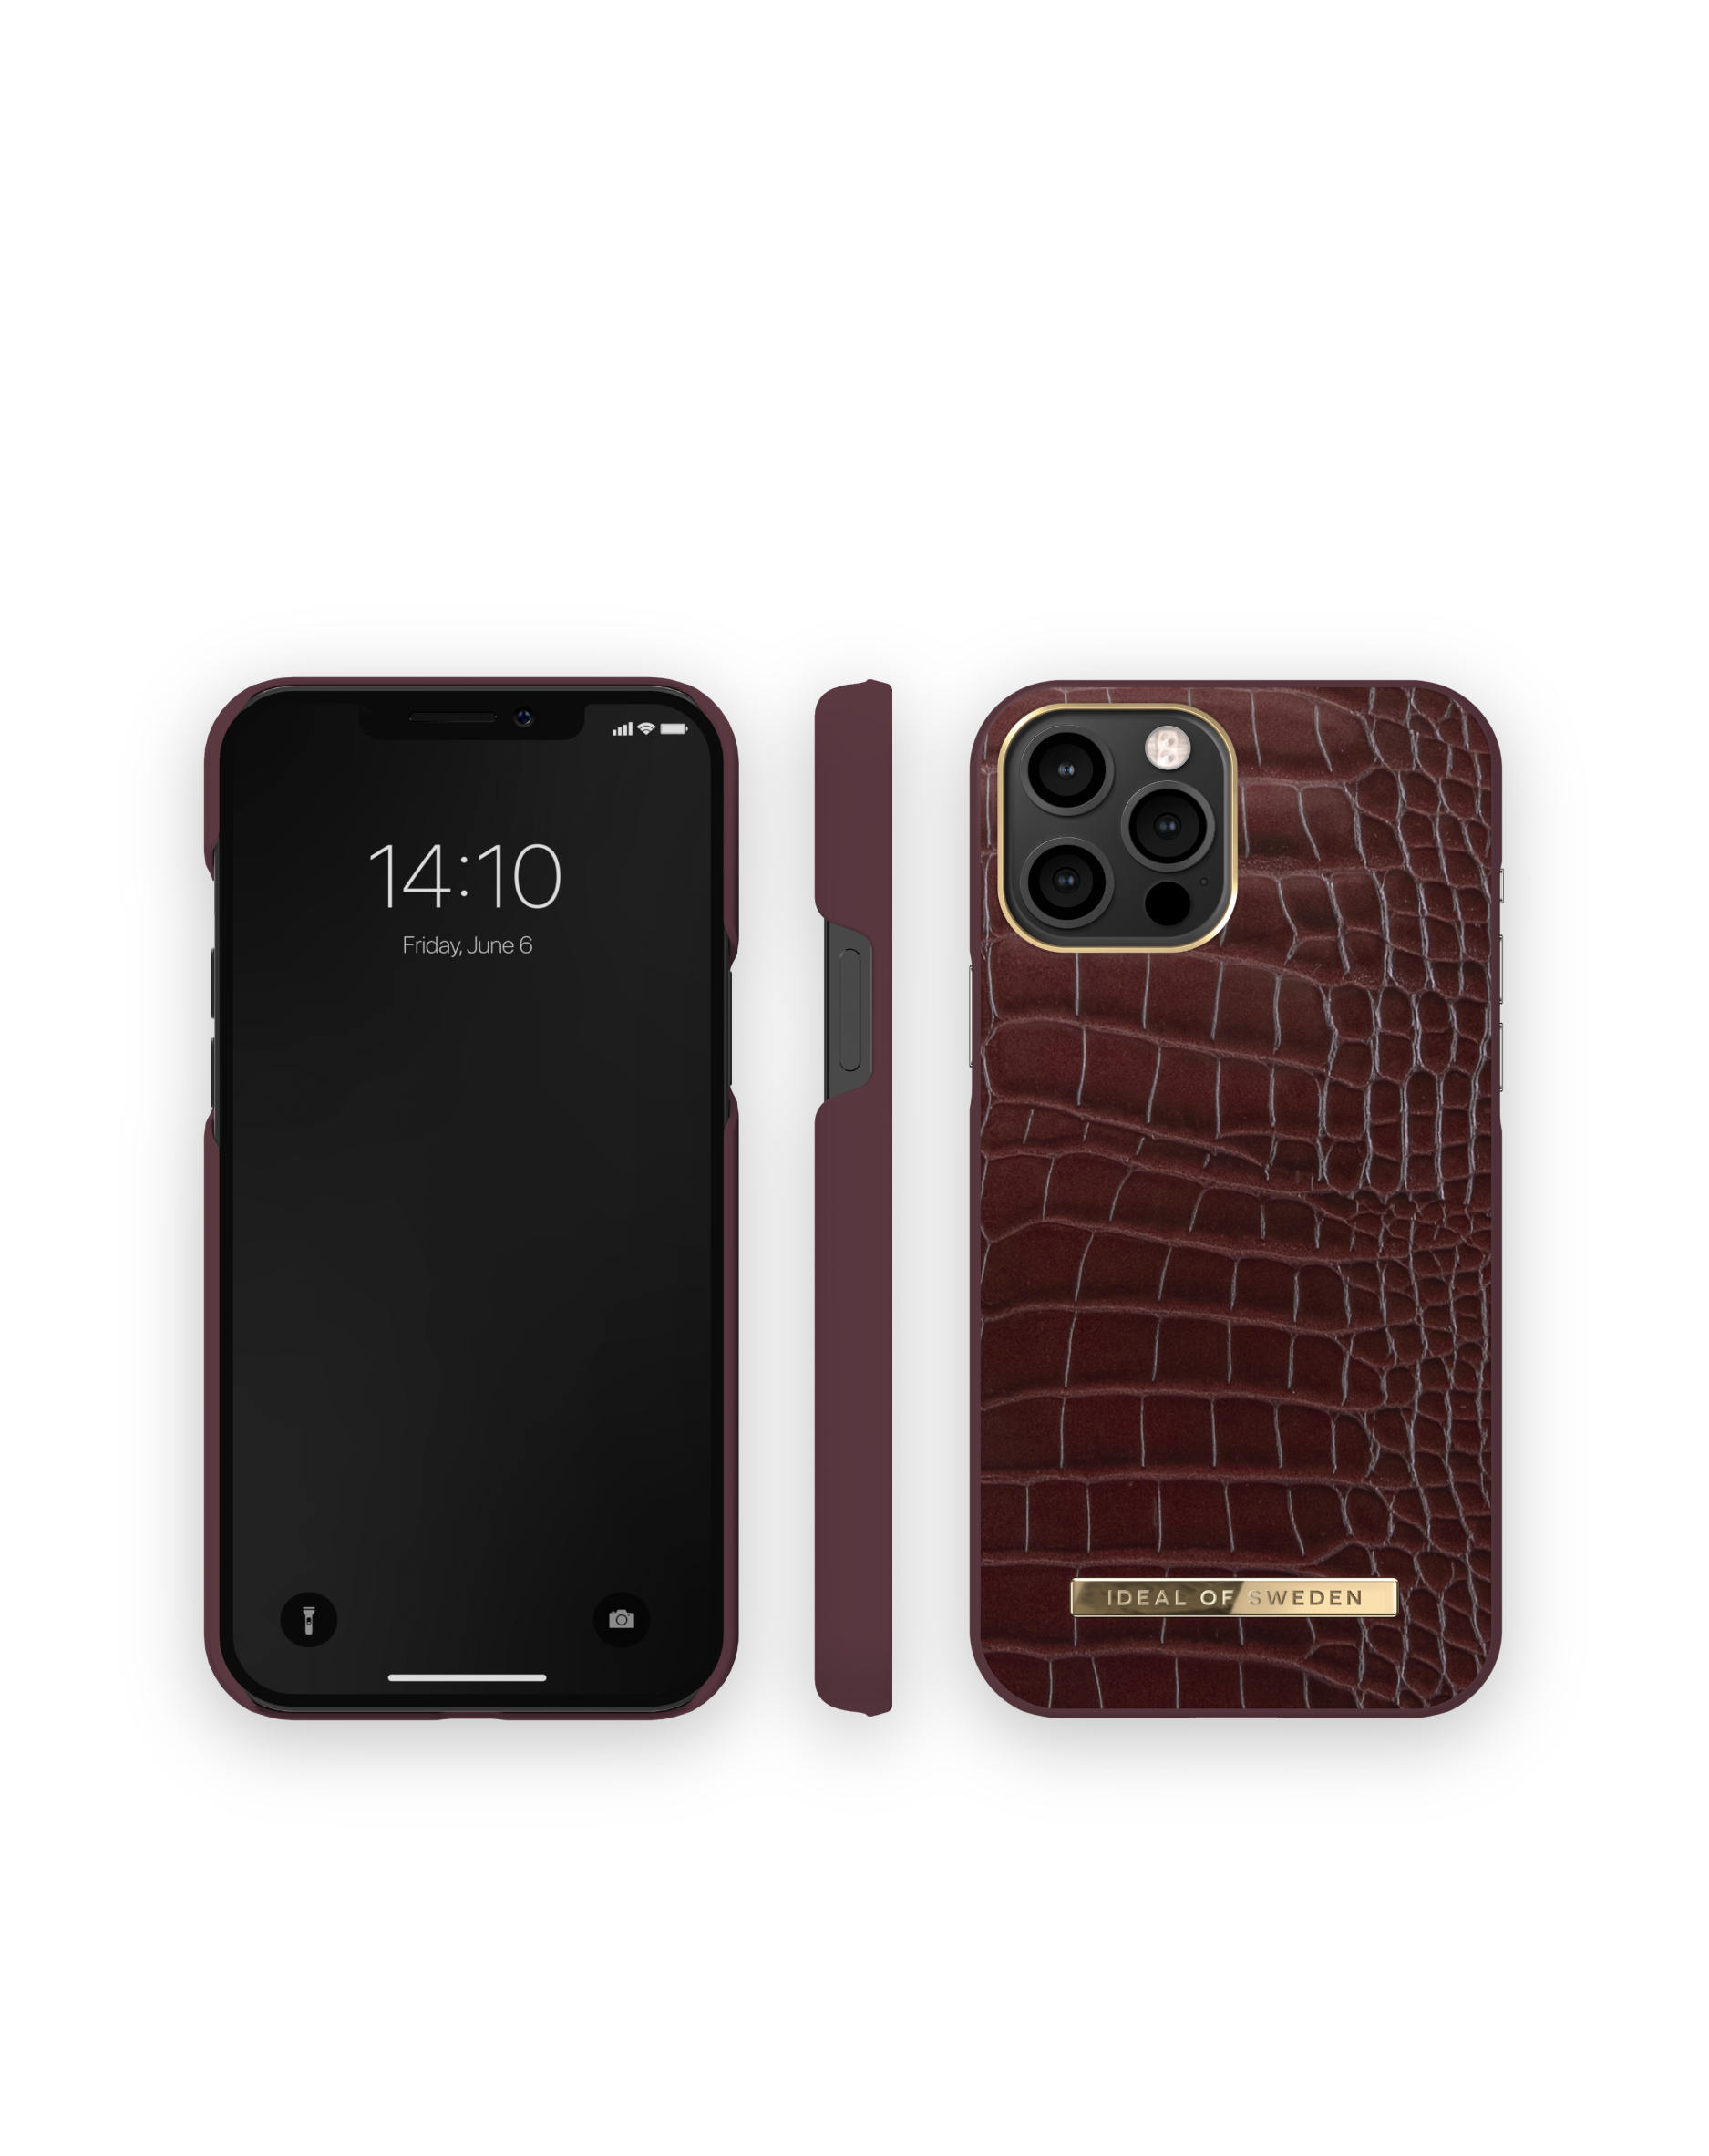 IDEAL OF IDACAW21-I2061-326, Scarlet 12/12 Croco Apple, Backcover, Pro, iPhone SWEDEN